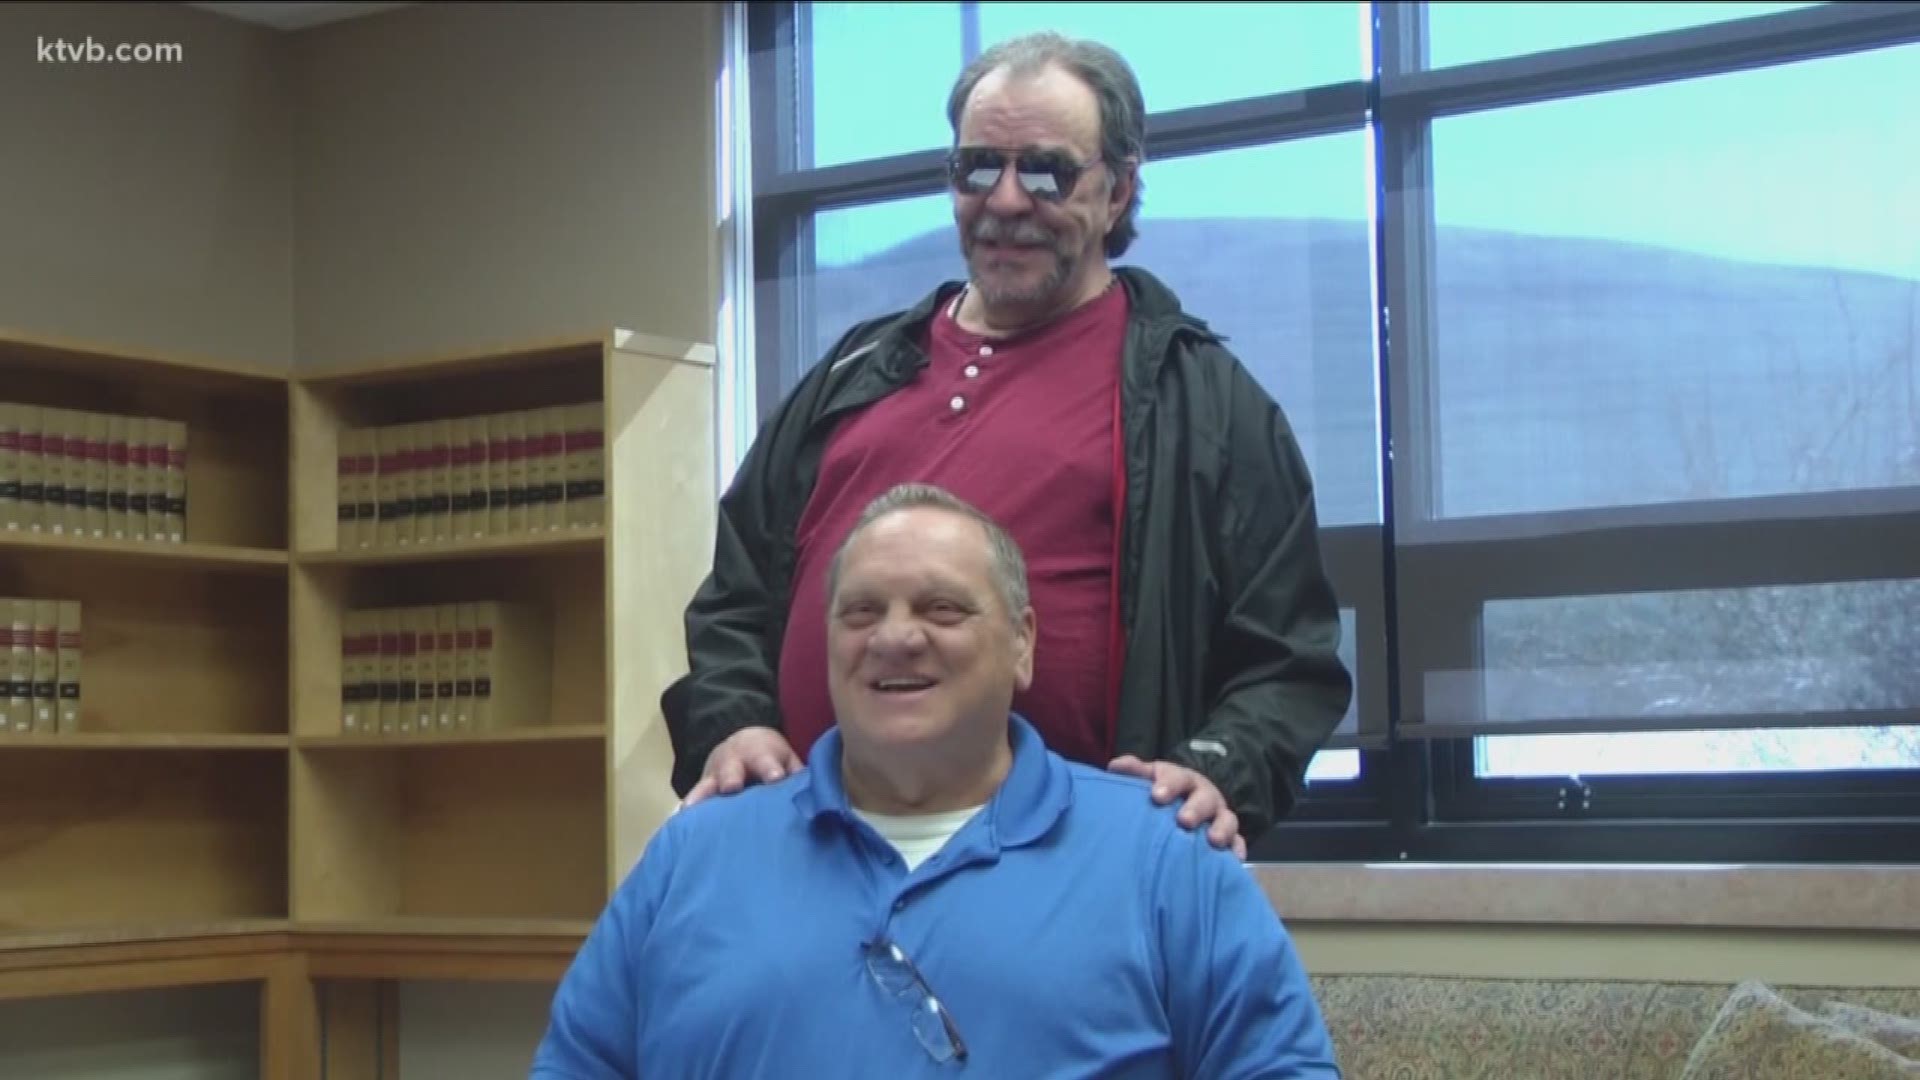 They men are free after serving 23 years in a Montana prison.